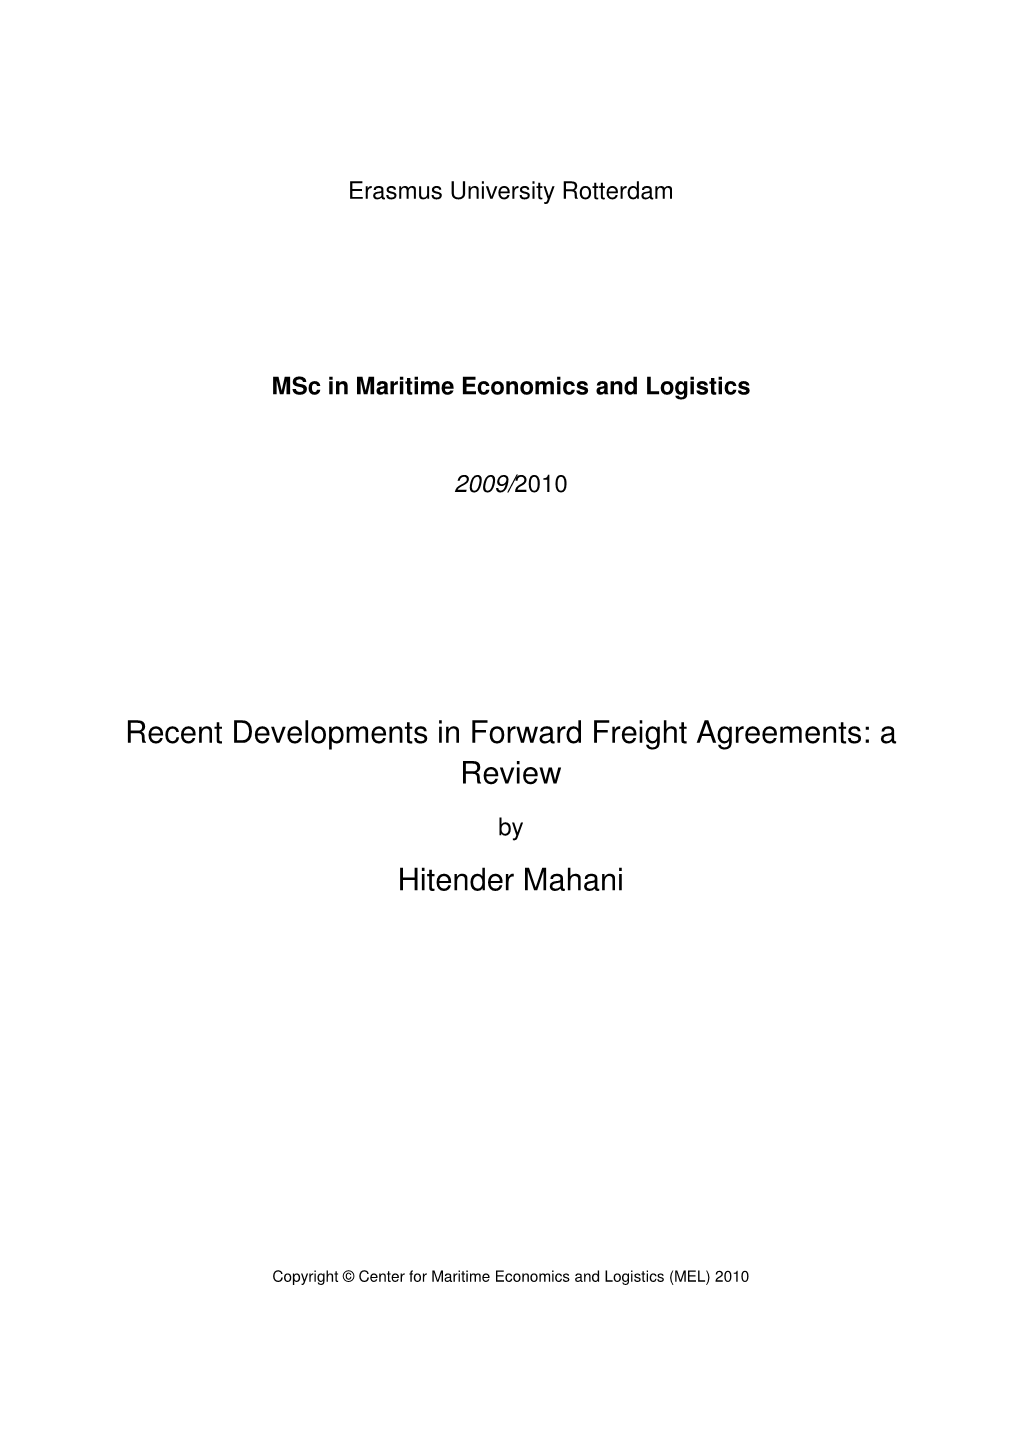 Recent Developments in Forward Freight Agreements: a Review